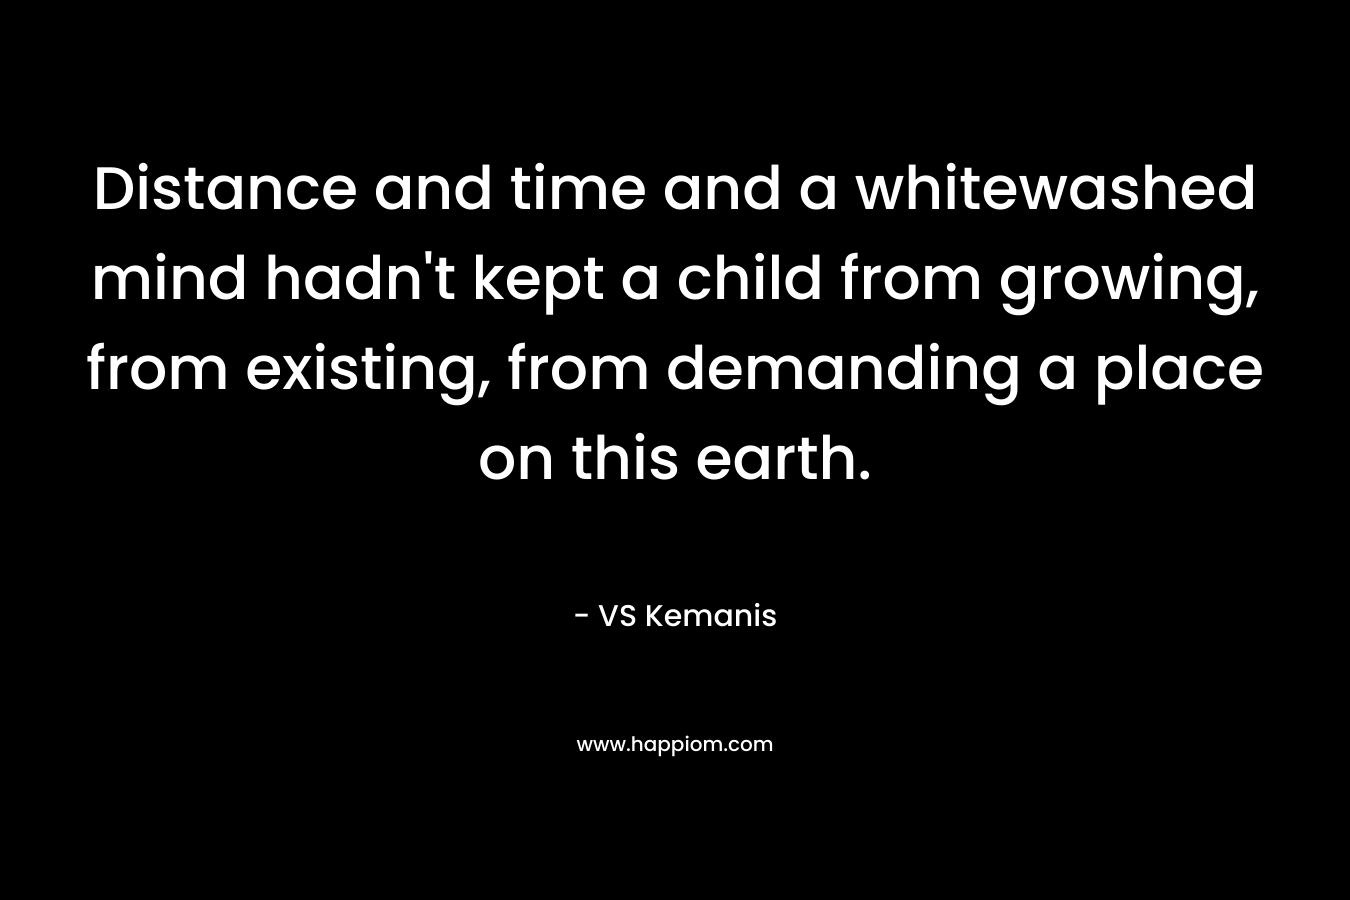 Distance and time and a whitewashed mind hadn’t kept a child from growing, from existing, from demanding a place on this earth. – VS Kemanis